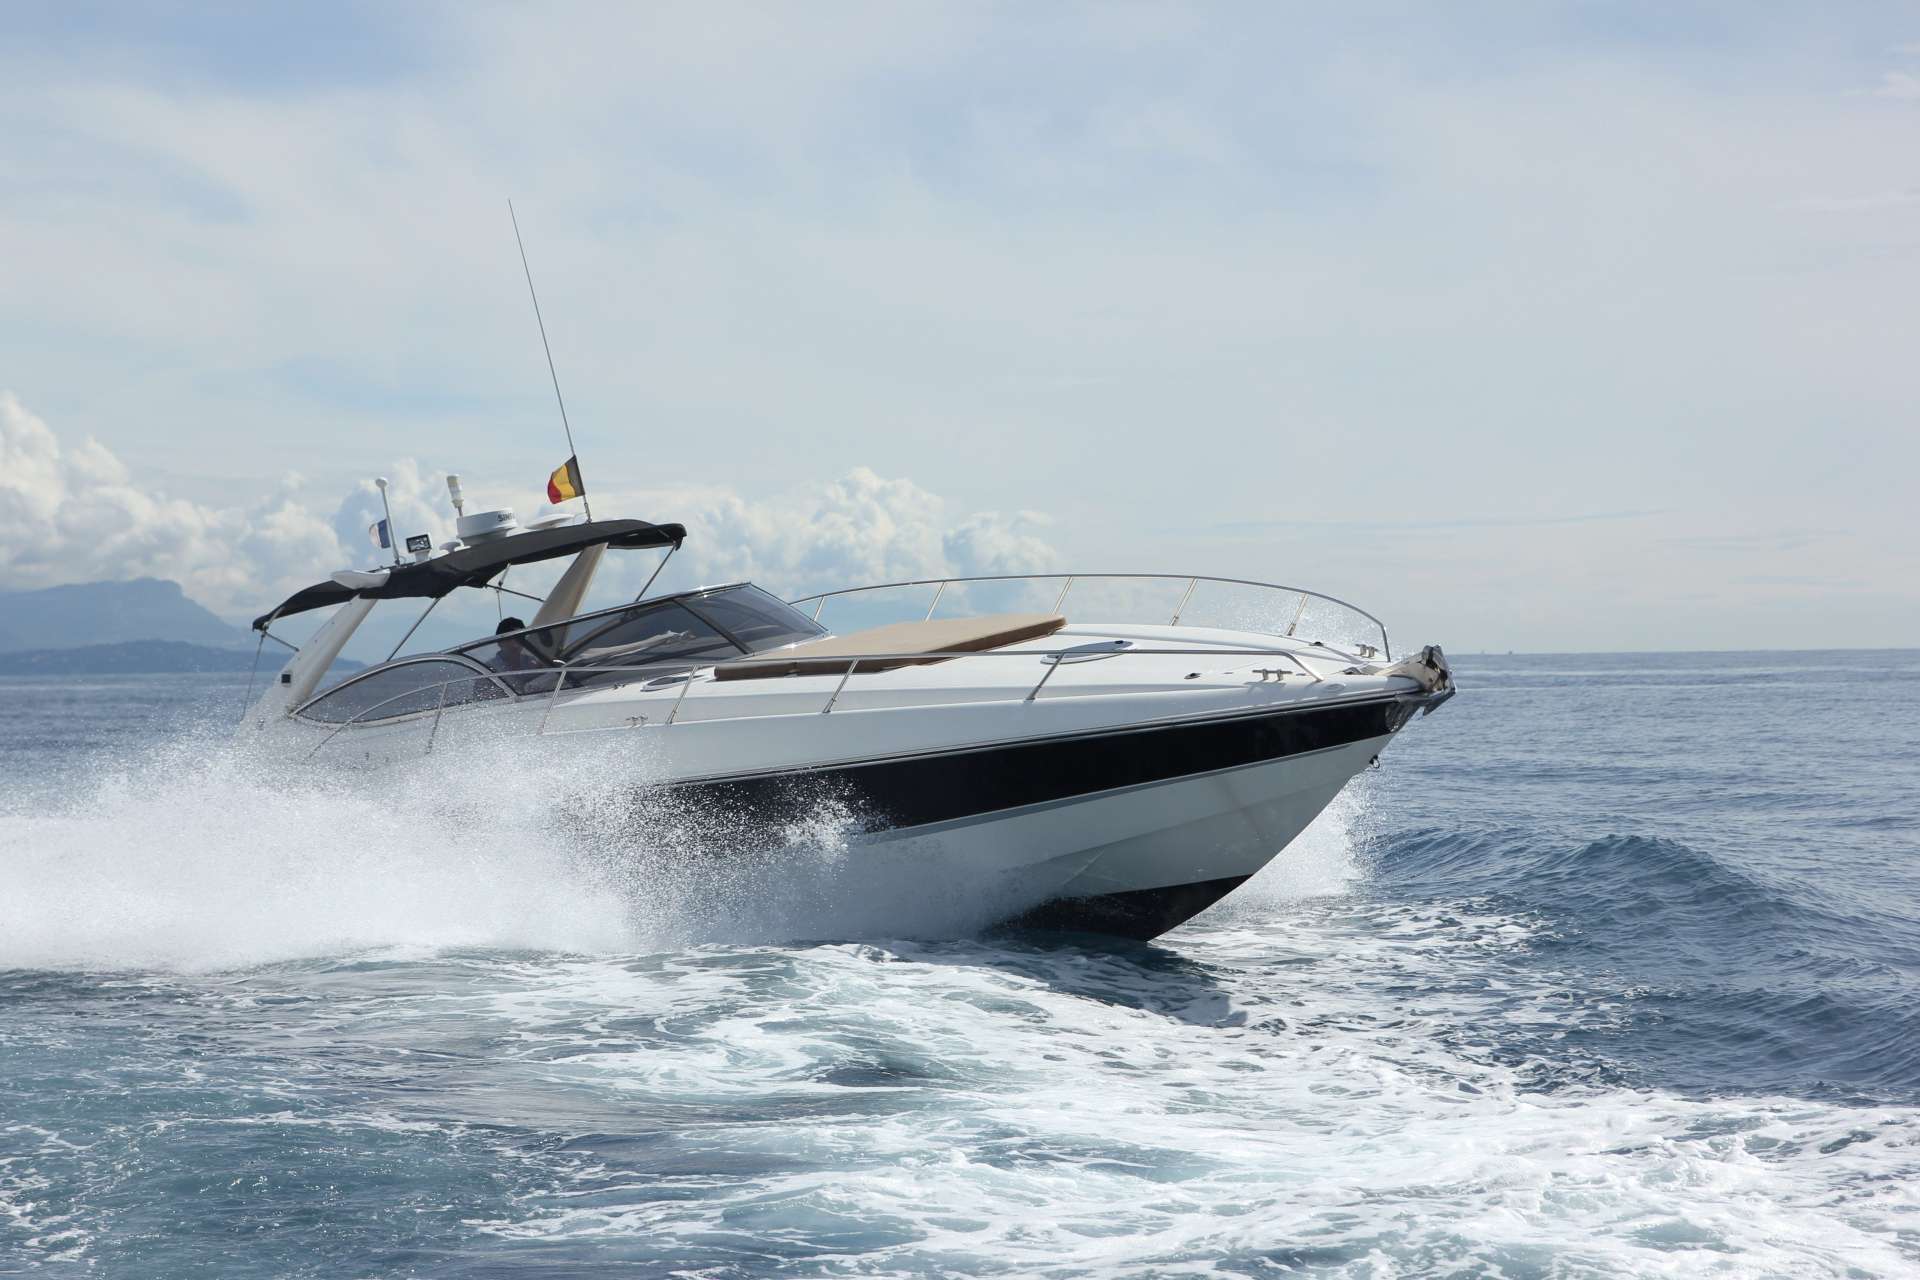 Sunseeker 48 - Yacht Charter Cannes & Boat hire in France French Riviera Cannes Vieux port de Vallauris 6